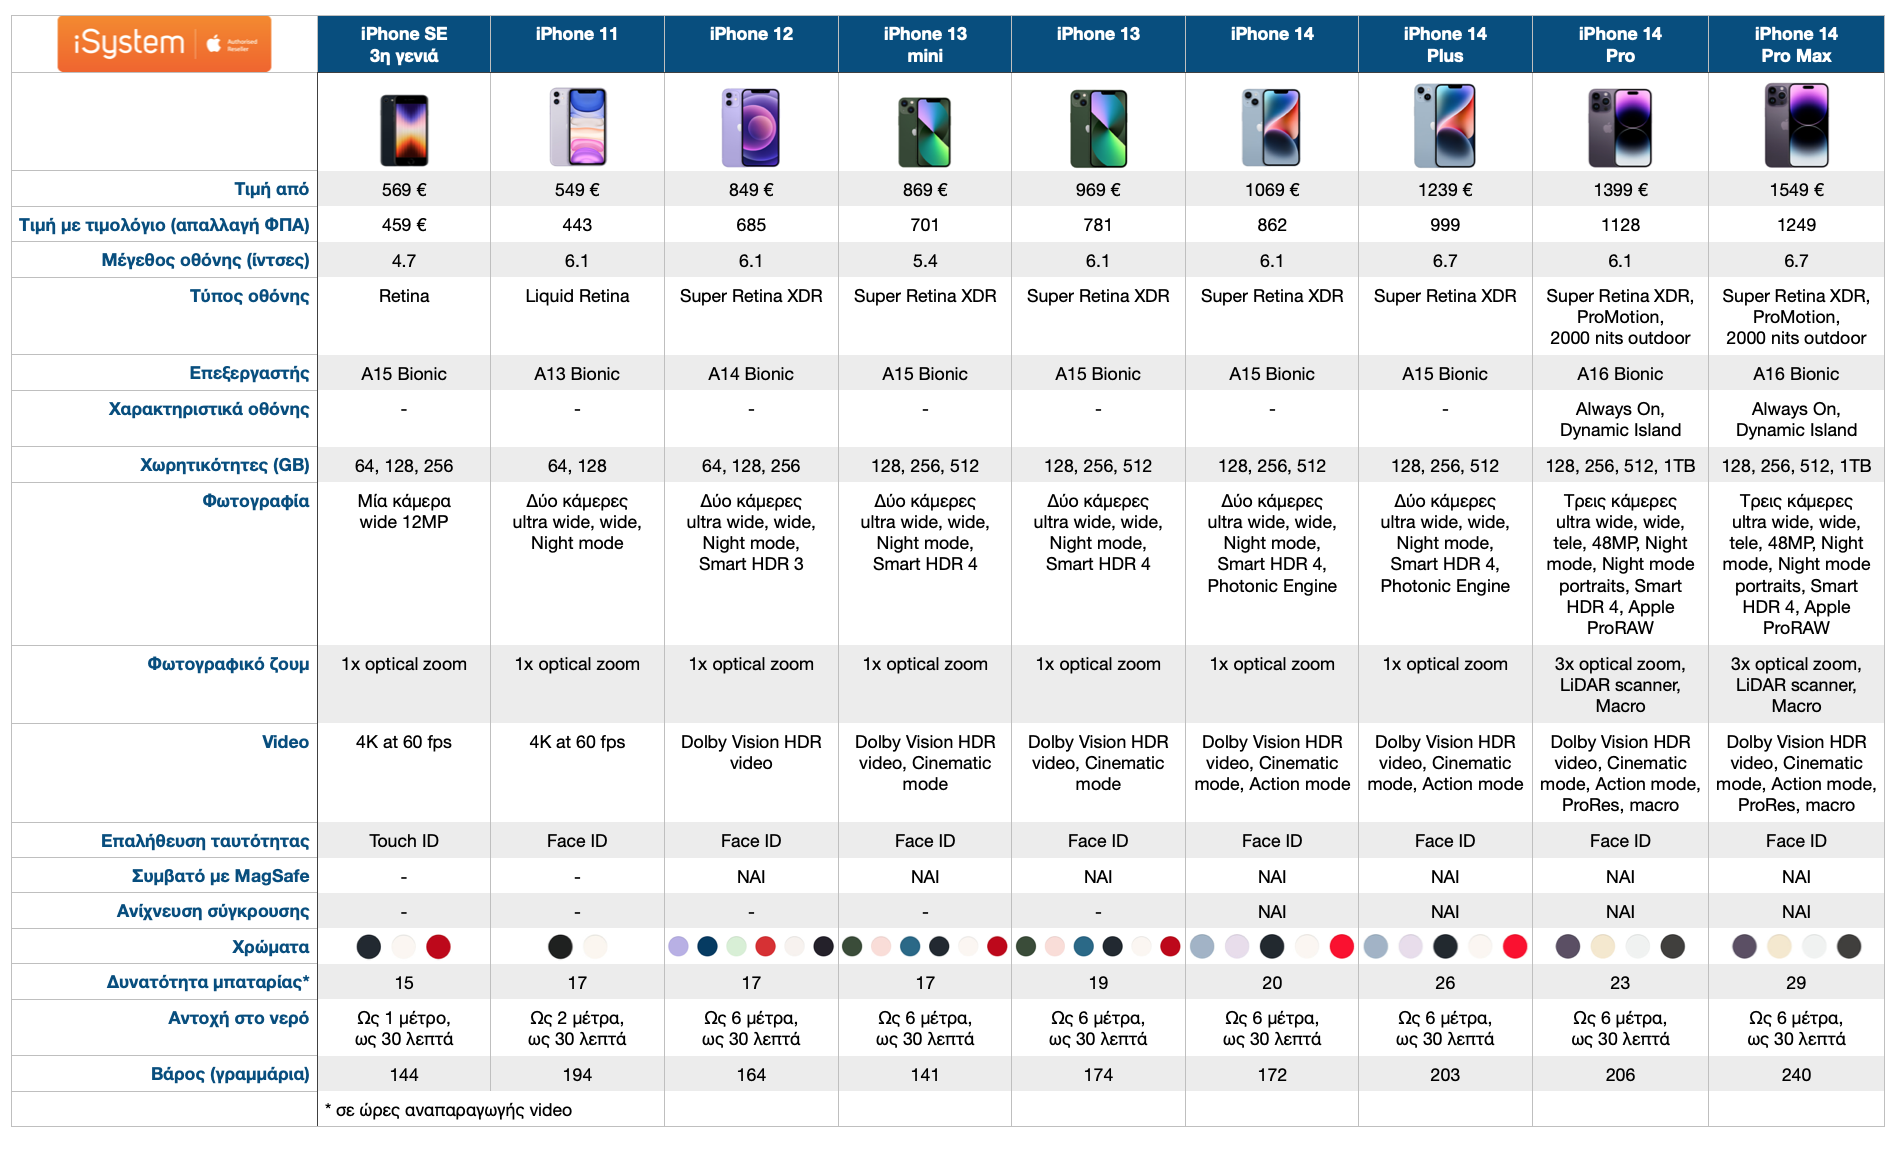 iphone pricing table